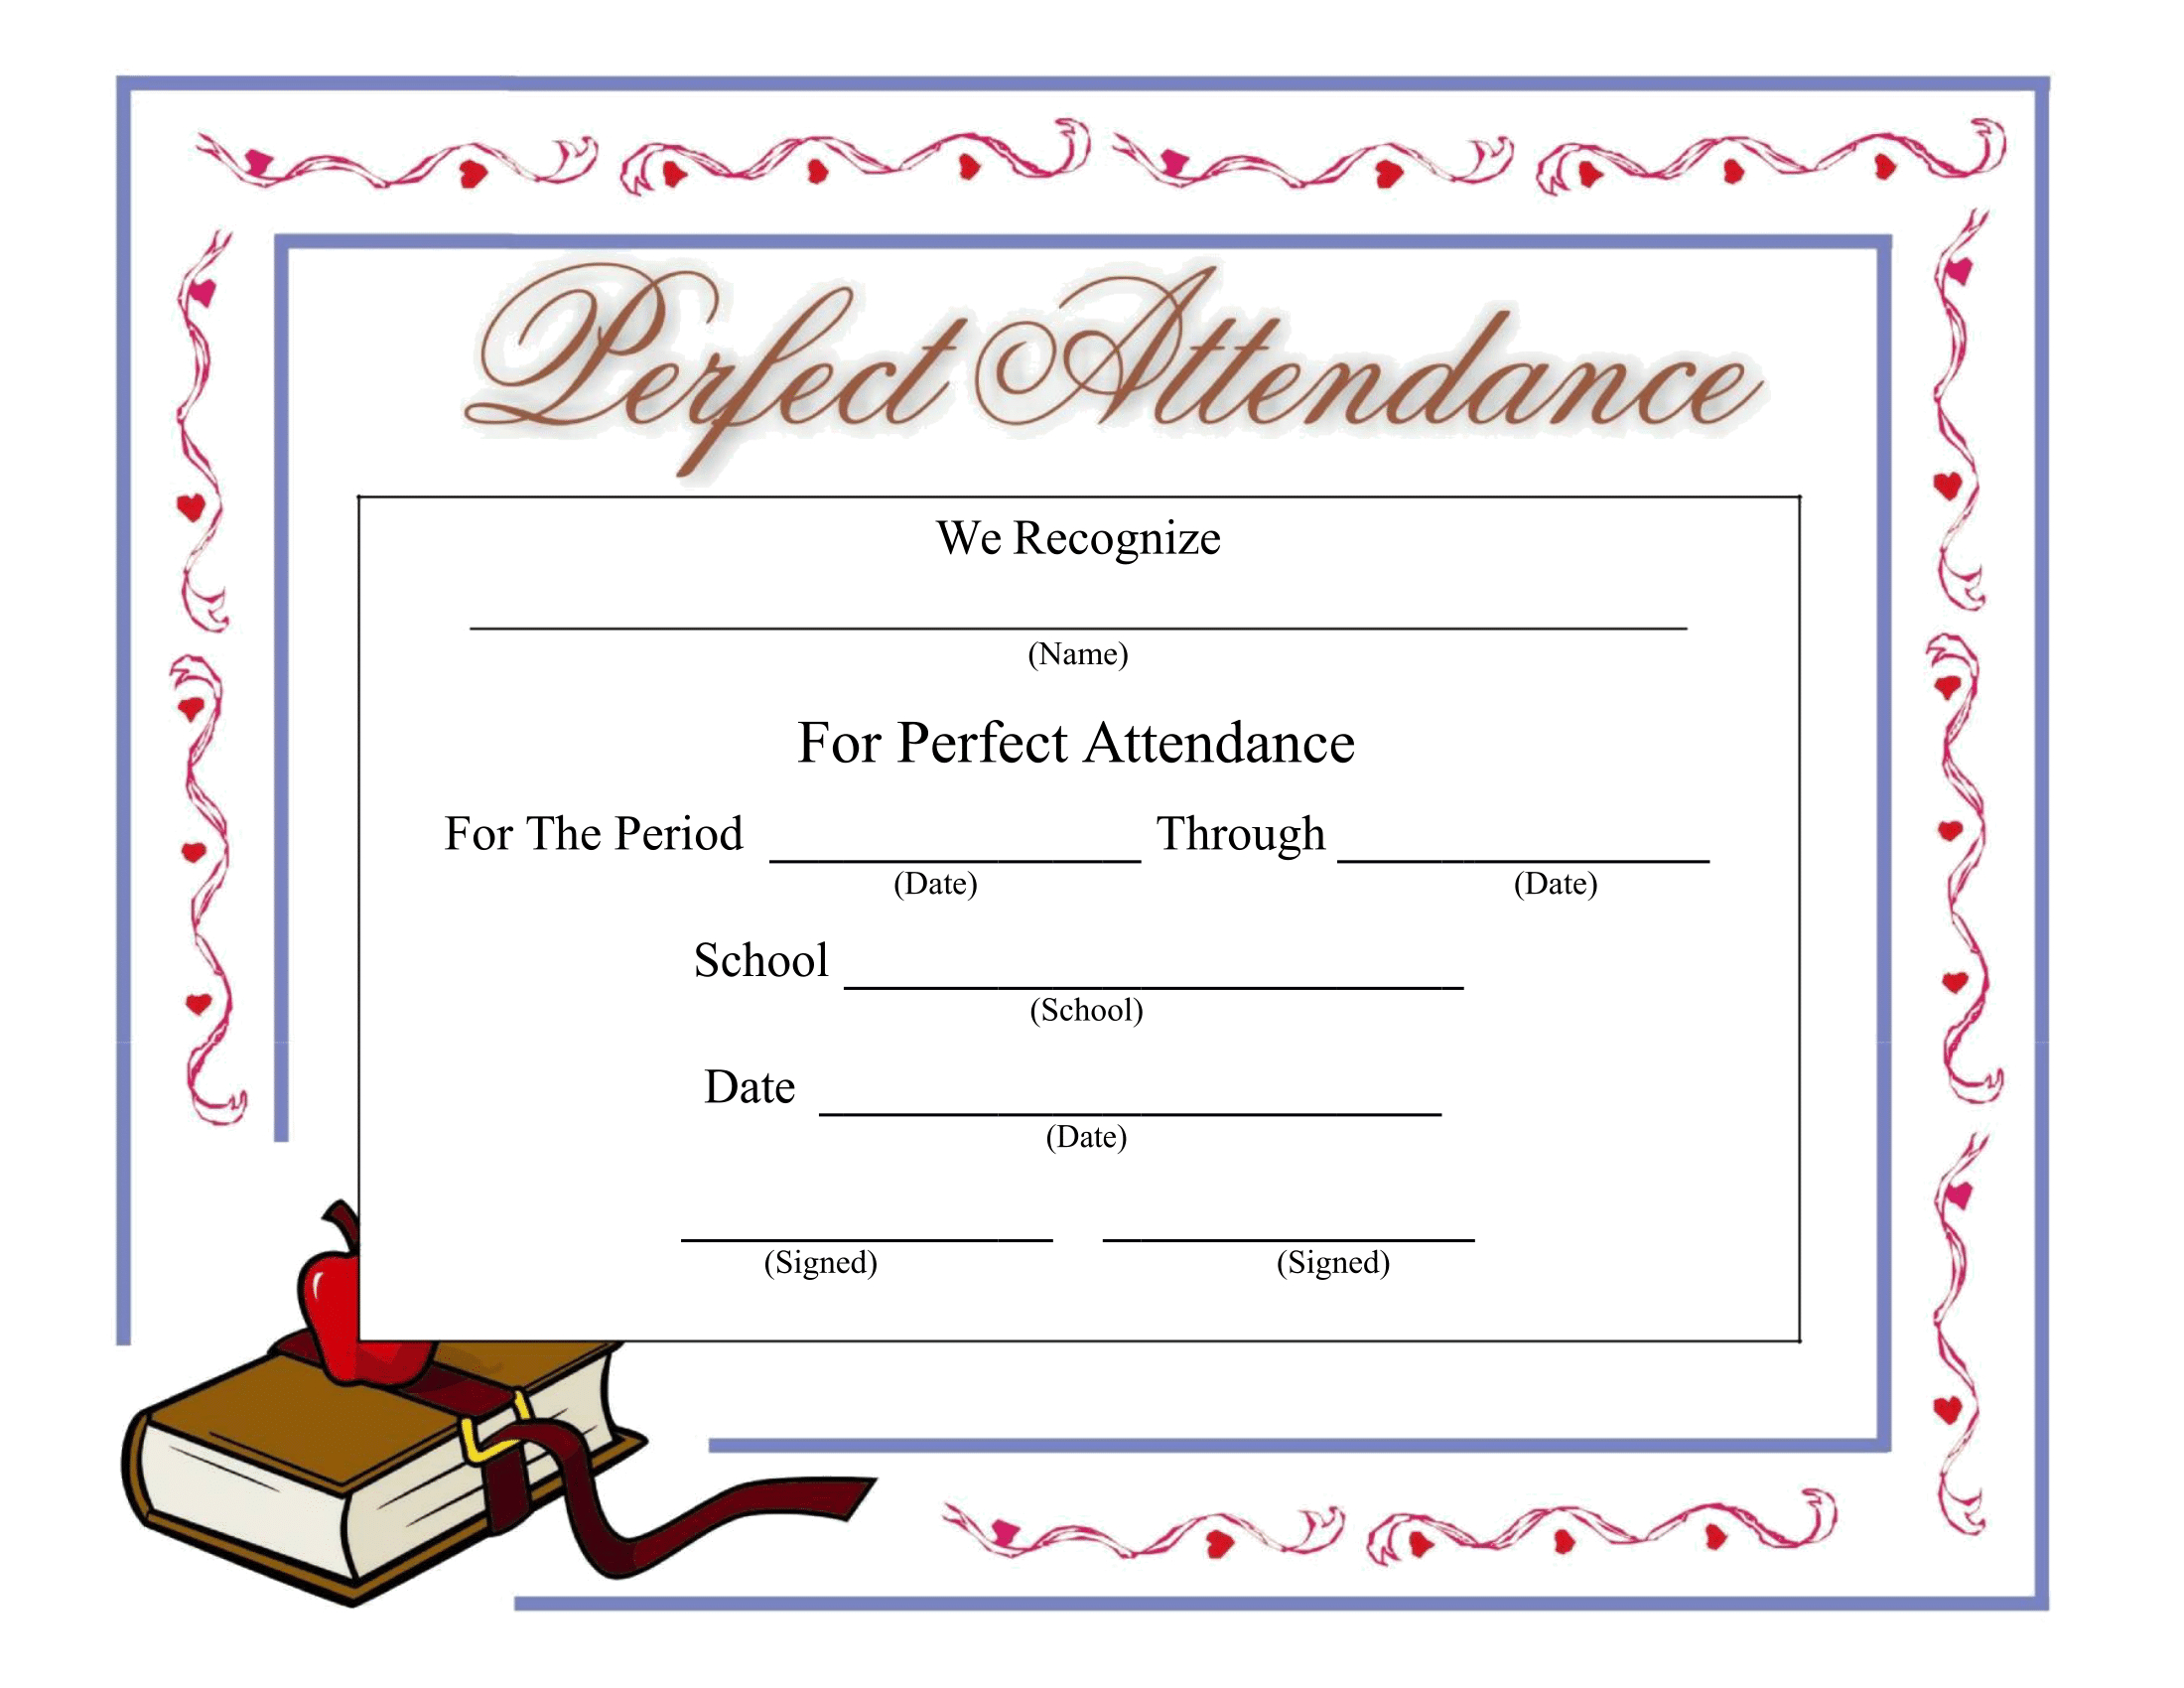 Perfect Attendance Certificate - Download A Free Template Inside Perfect Attendance Certificate Template